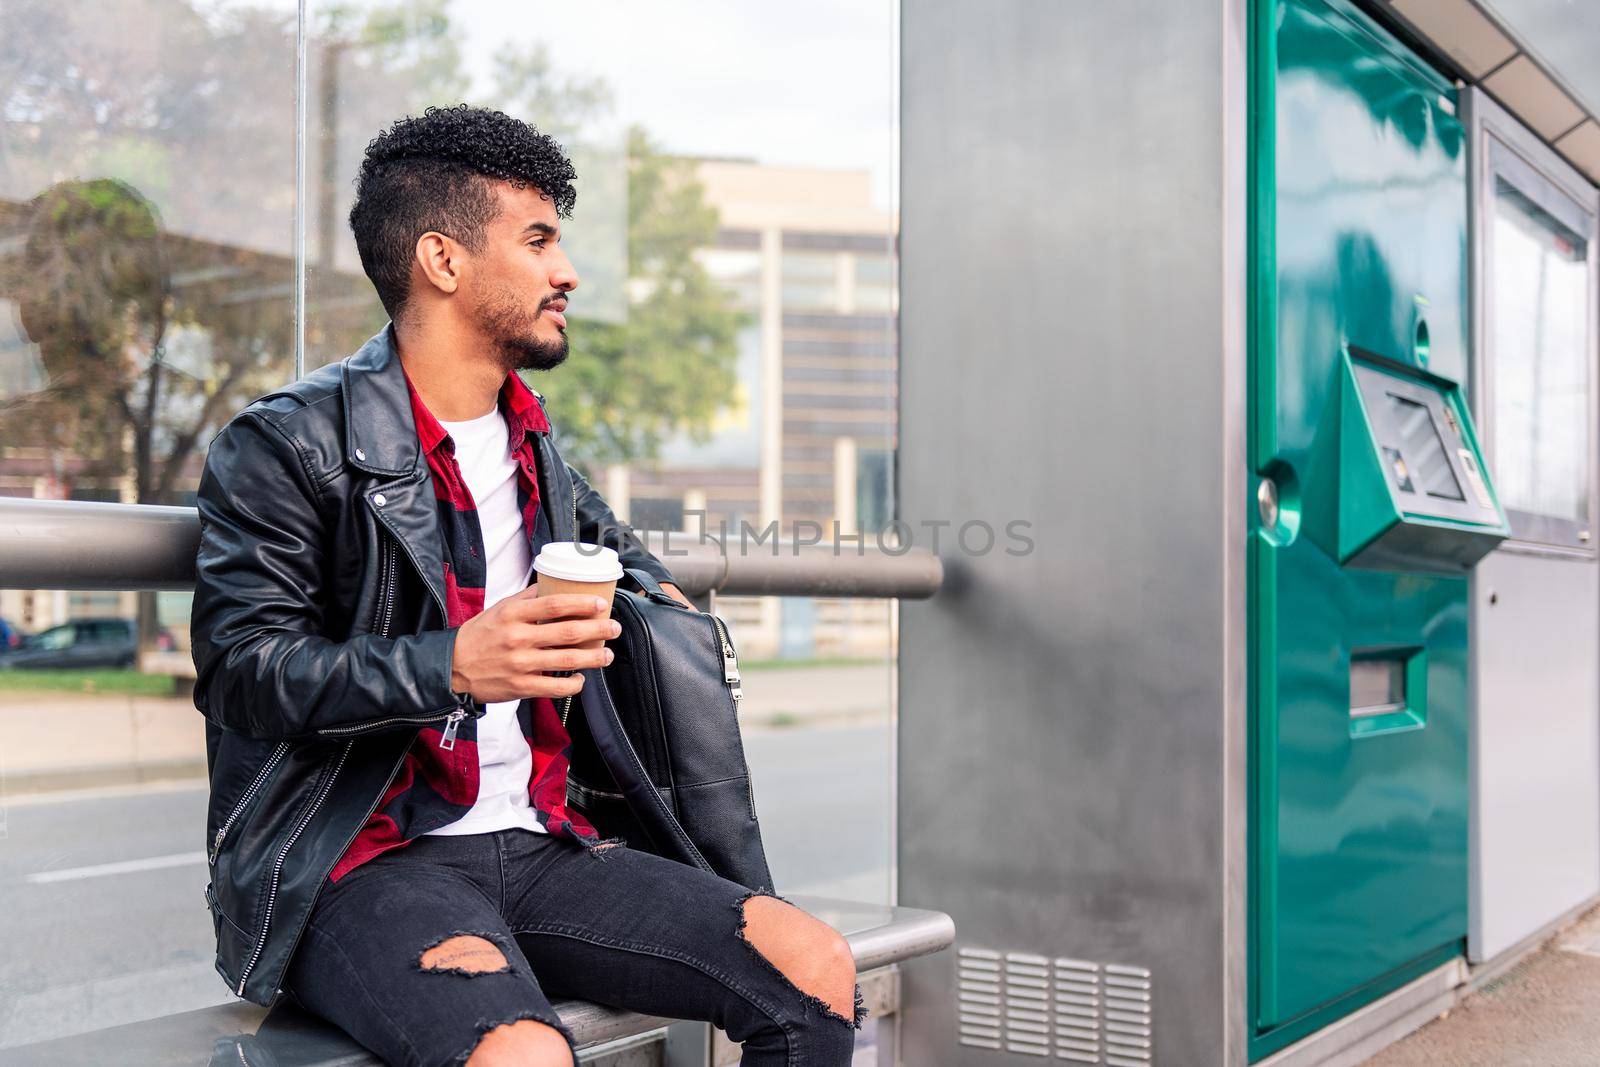 young latin man with a coffee in his hand waits for the arrival of public transportation sitting at the bus stop, concept of sustainable transportation and urban lifestyle